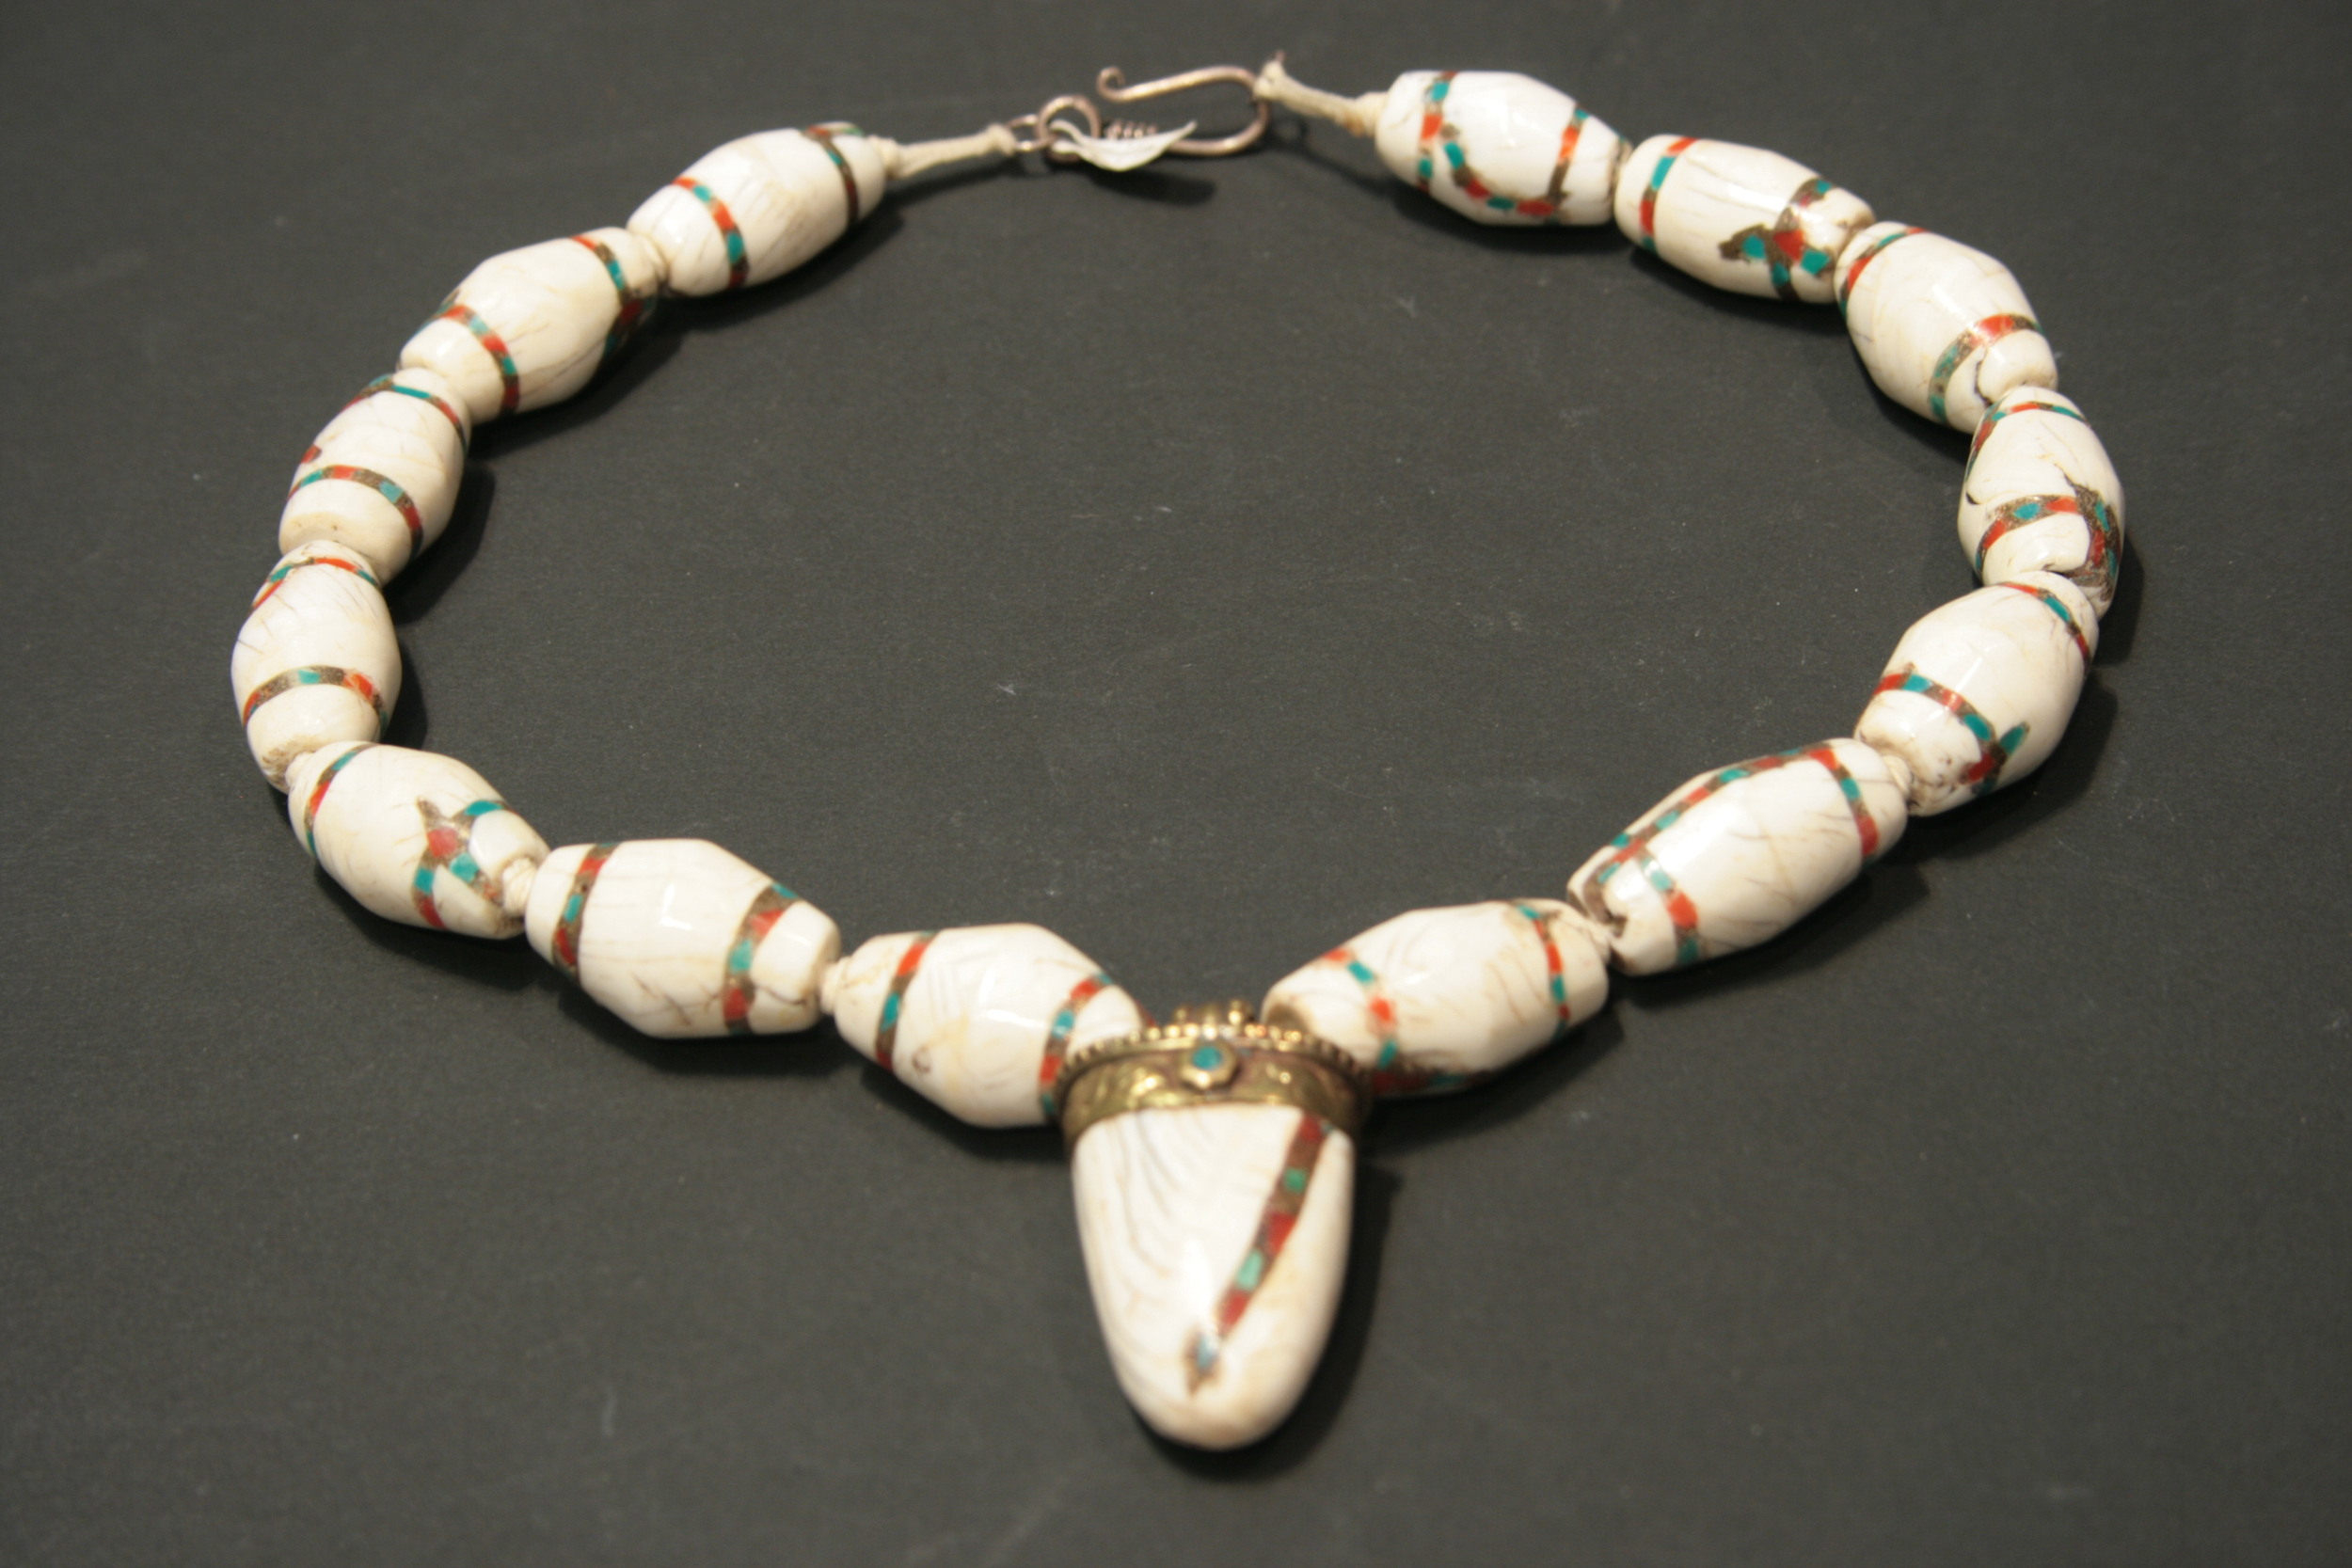 Old Tibetan shell necklace with inlaid turquoise and coral